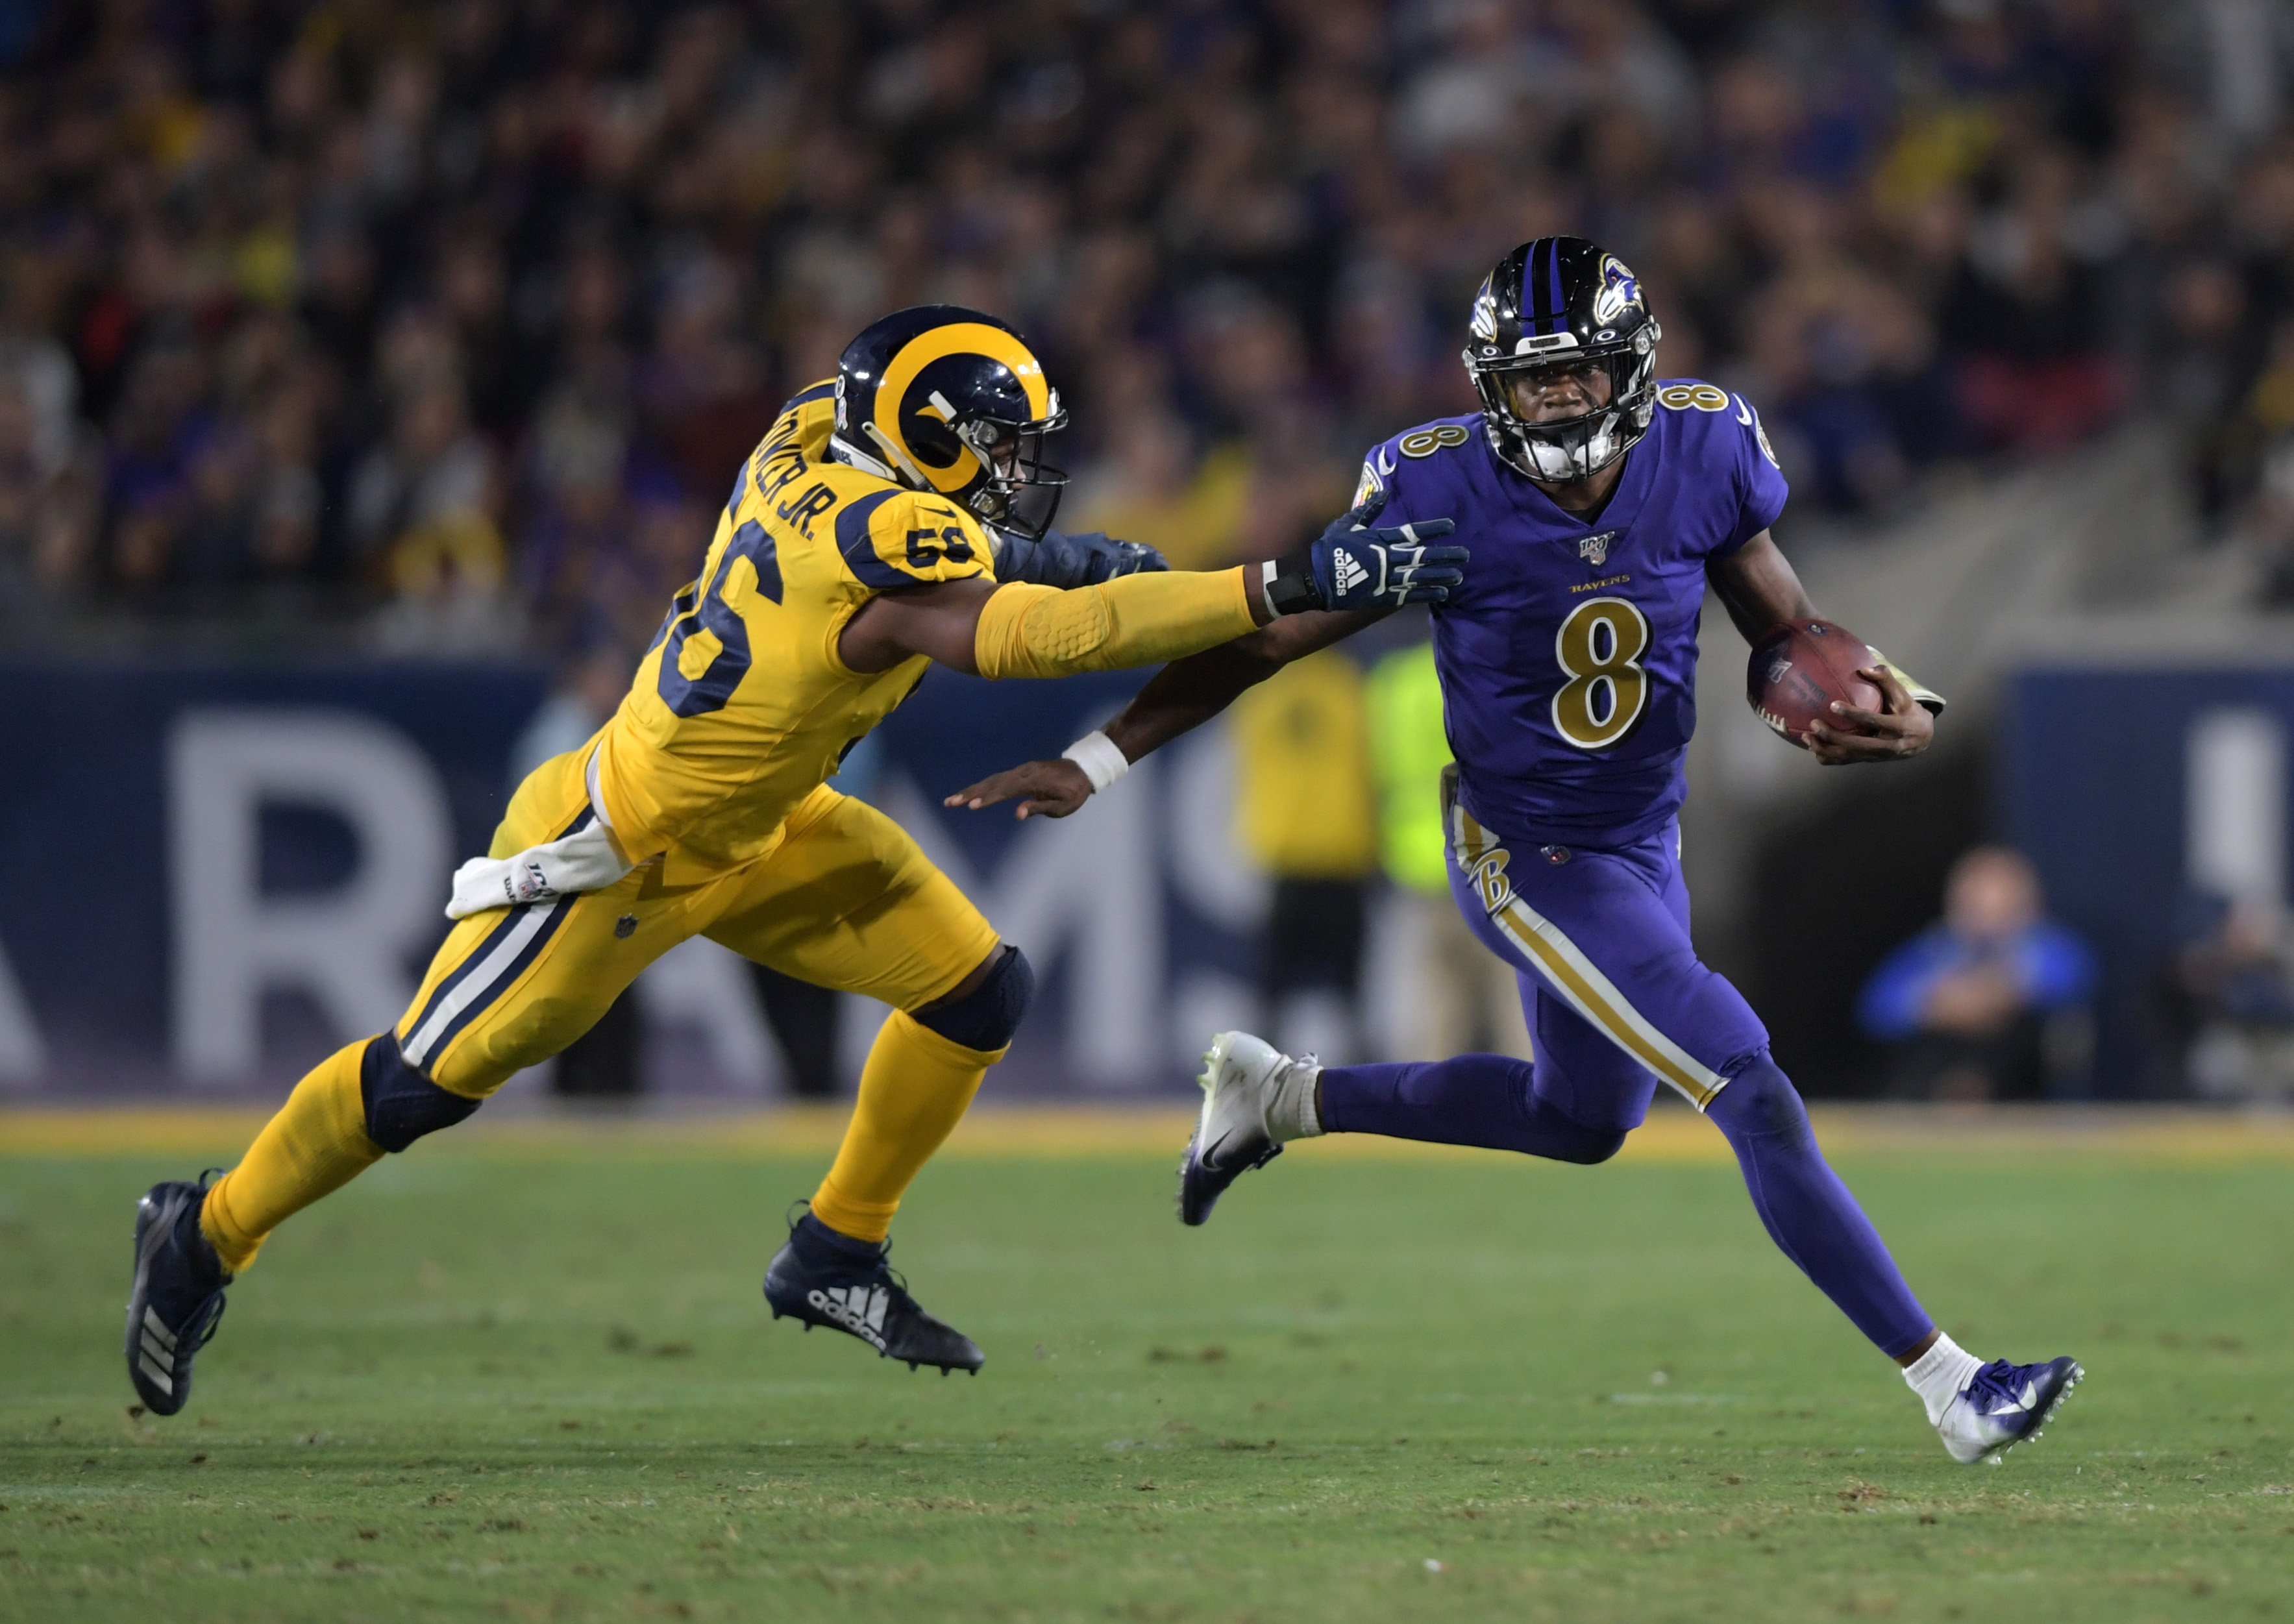 Nov 25, 2019; Los Angeles, CA, USA; Baltimore Ravens quarterback Lamar Jackson (8) is pursued by Los Angeles Rams defensive end Dante Fowler (56) in the third quarter at Los Angeles Memorial Coliseum. The Ravens defeated the Rams 45-6. 